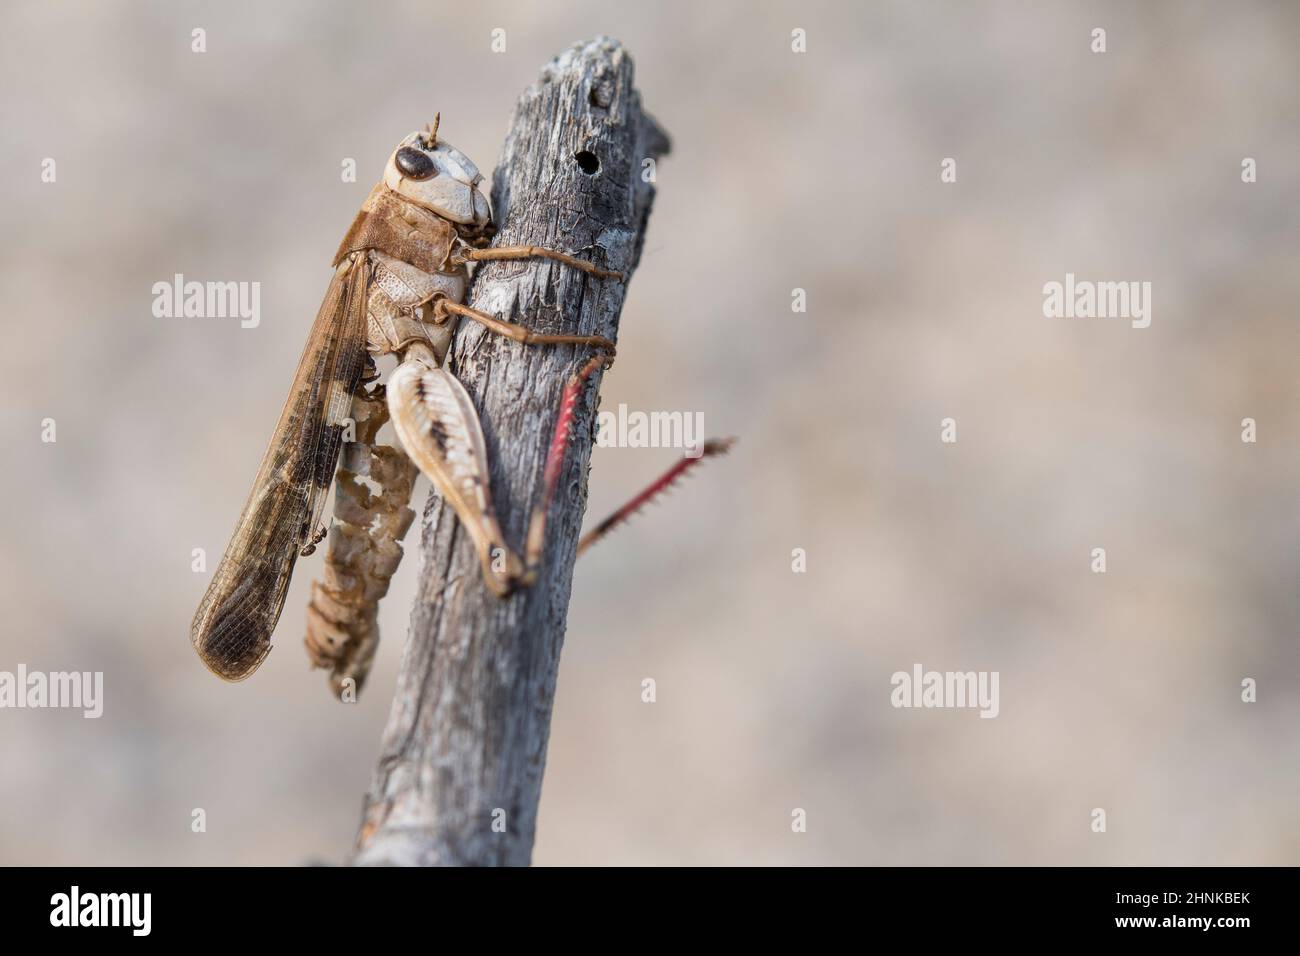 Aiolopus strepens dead clinging to the top of a branch due to 'summit disease' caused by parasitic fungus Entomophaga grylli, a tiny ant seach food. Stock Photo